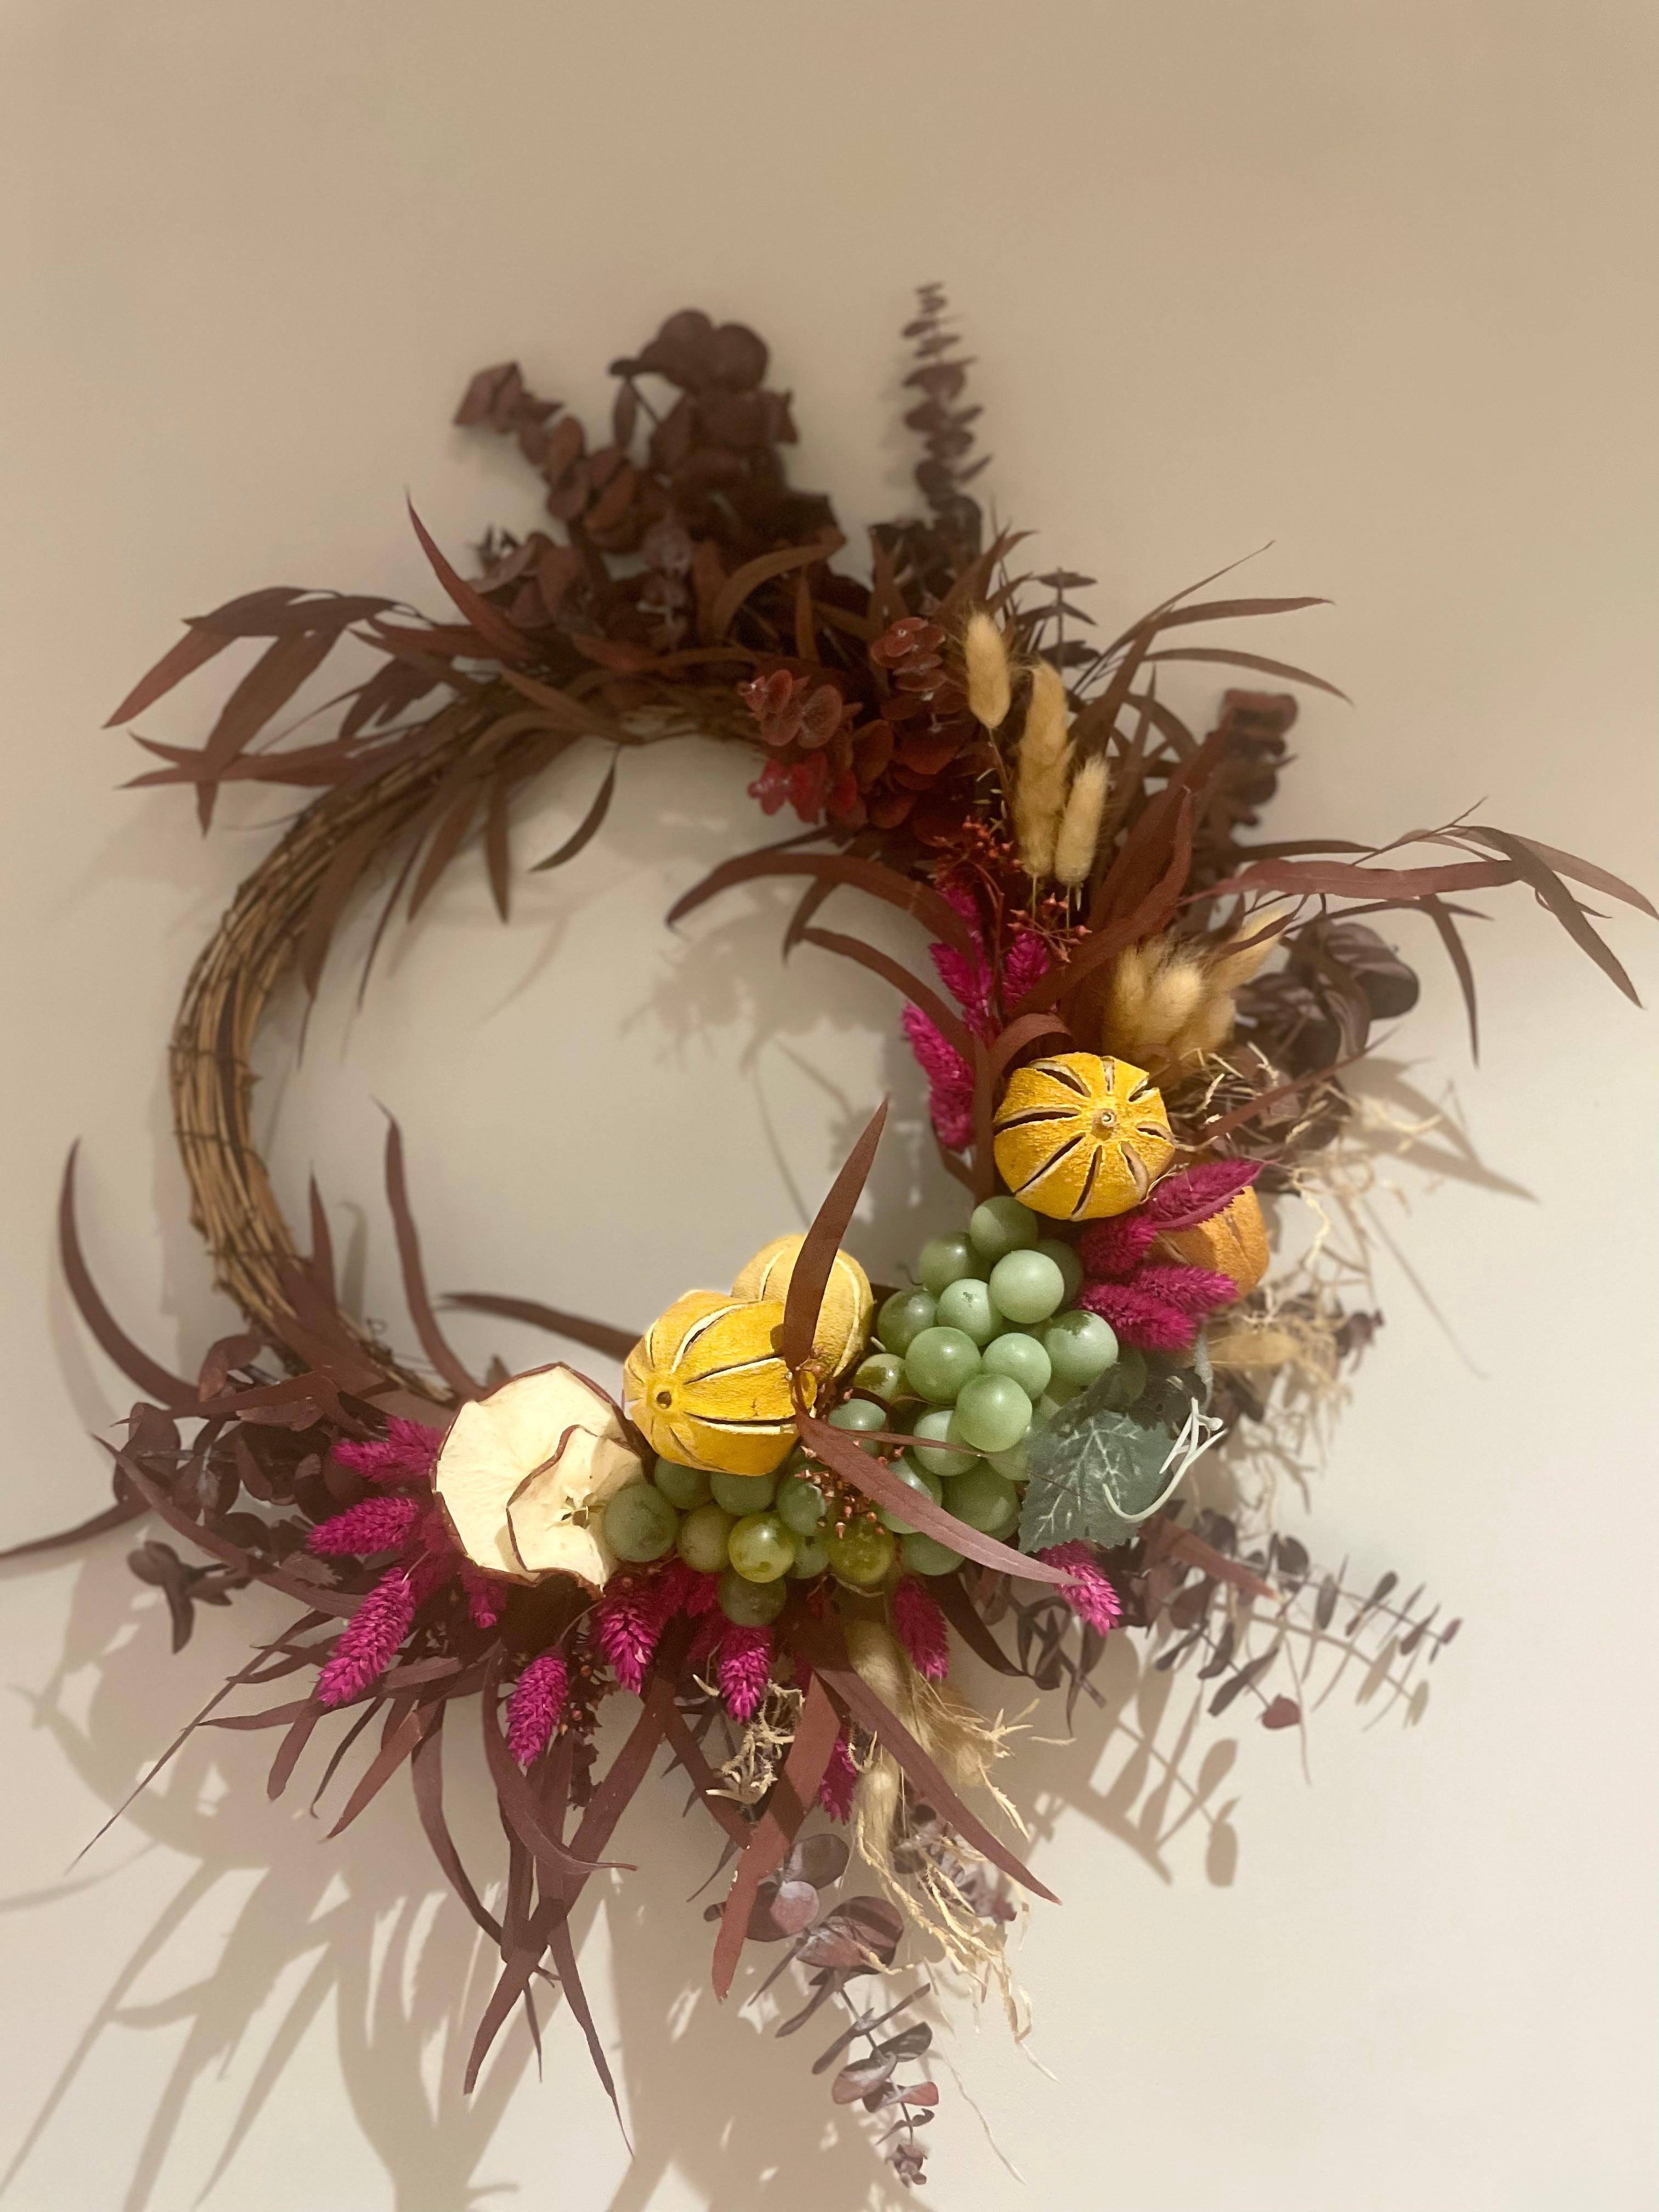 Dried Fruits and Flowers Wreath - Ø50cm